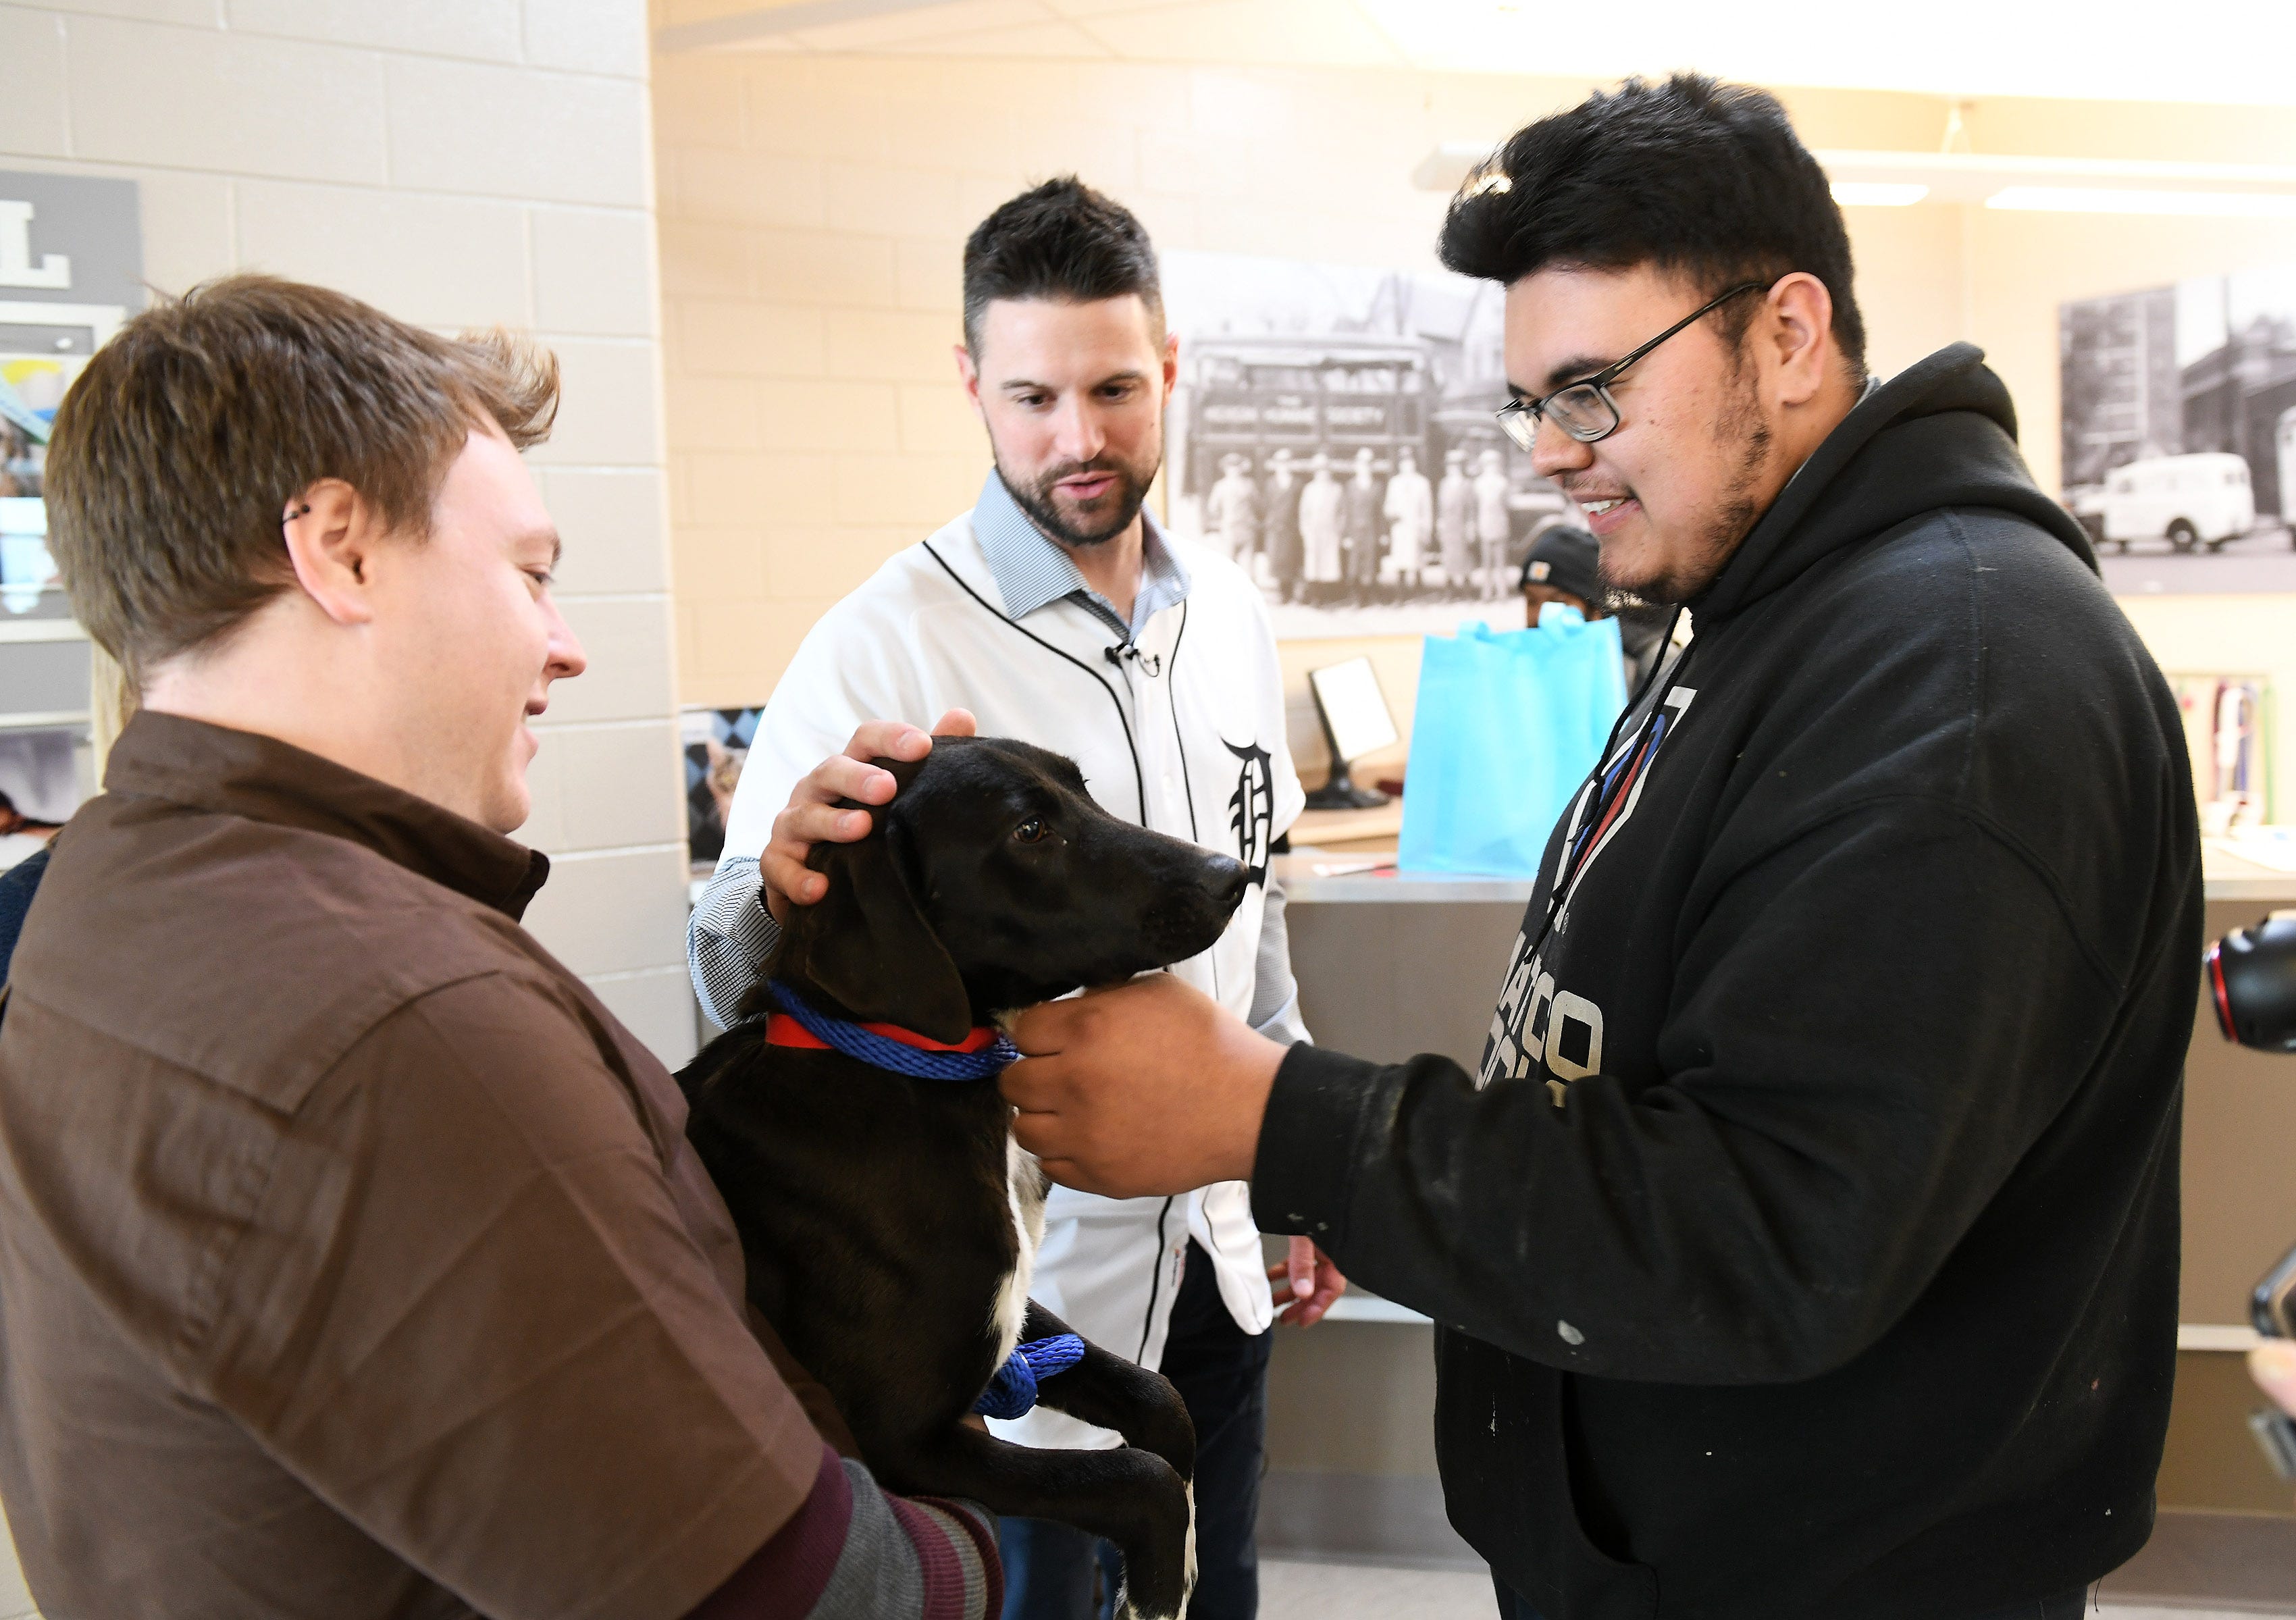 While Michigan Humane Society animal transport driver Jeremy Colborn holds her, Tigers shortstop Jordy Mercer and Marcelo Alvarado, 24, of Detroit, right, pet Lark, a Labrador that Marcelo is adopting, at the Michigan Humane Society.